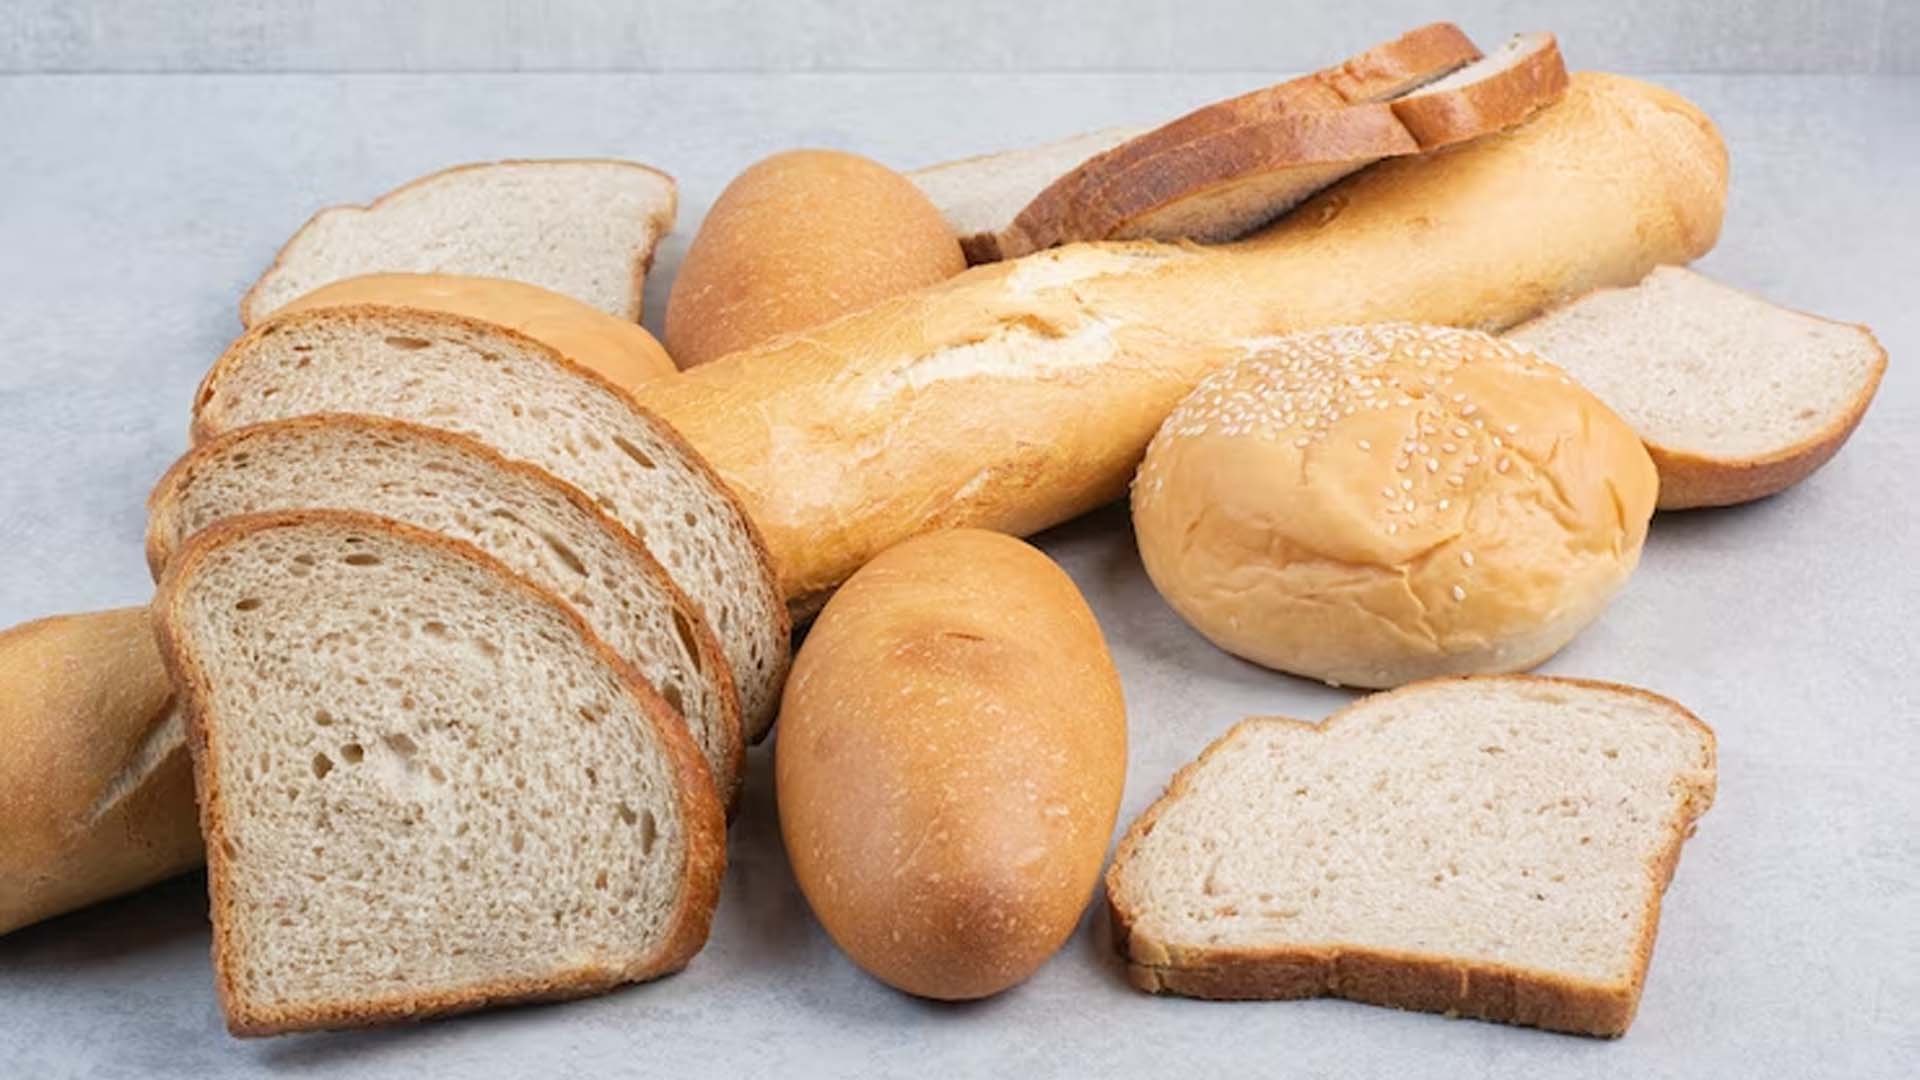 Can you Include White Bread in Diet? Is It Good or Bad?